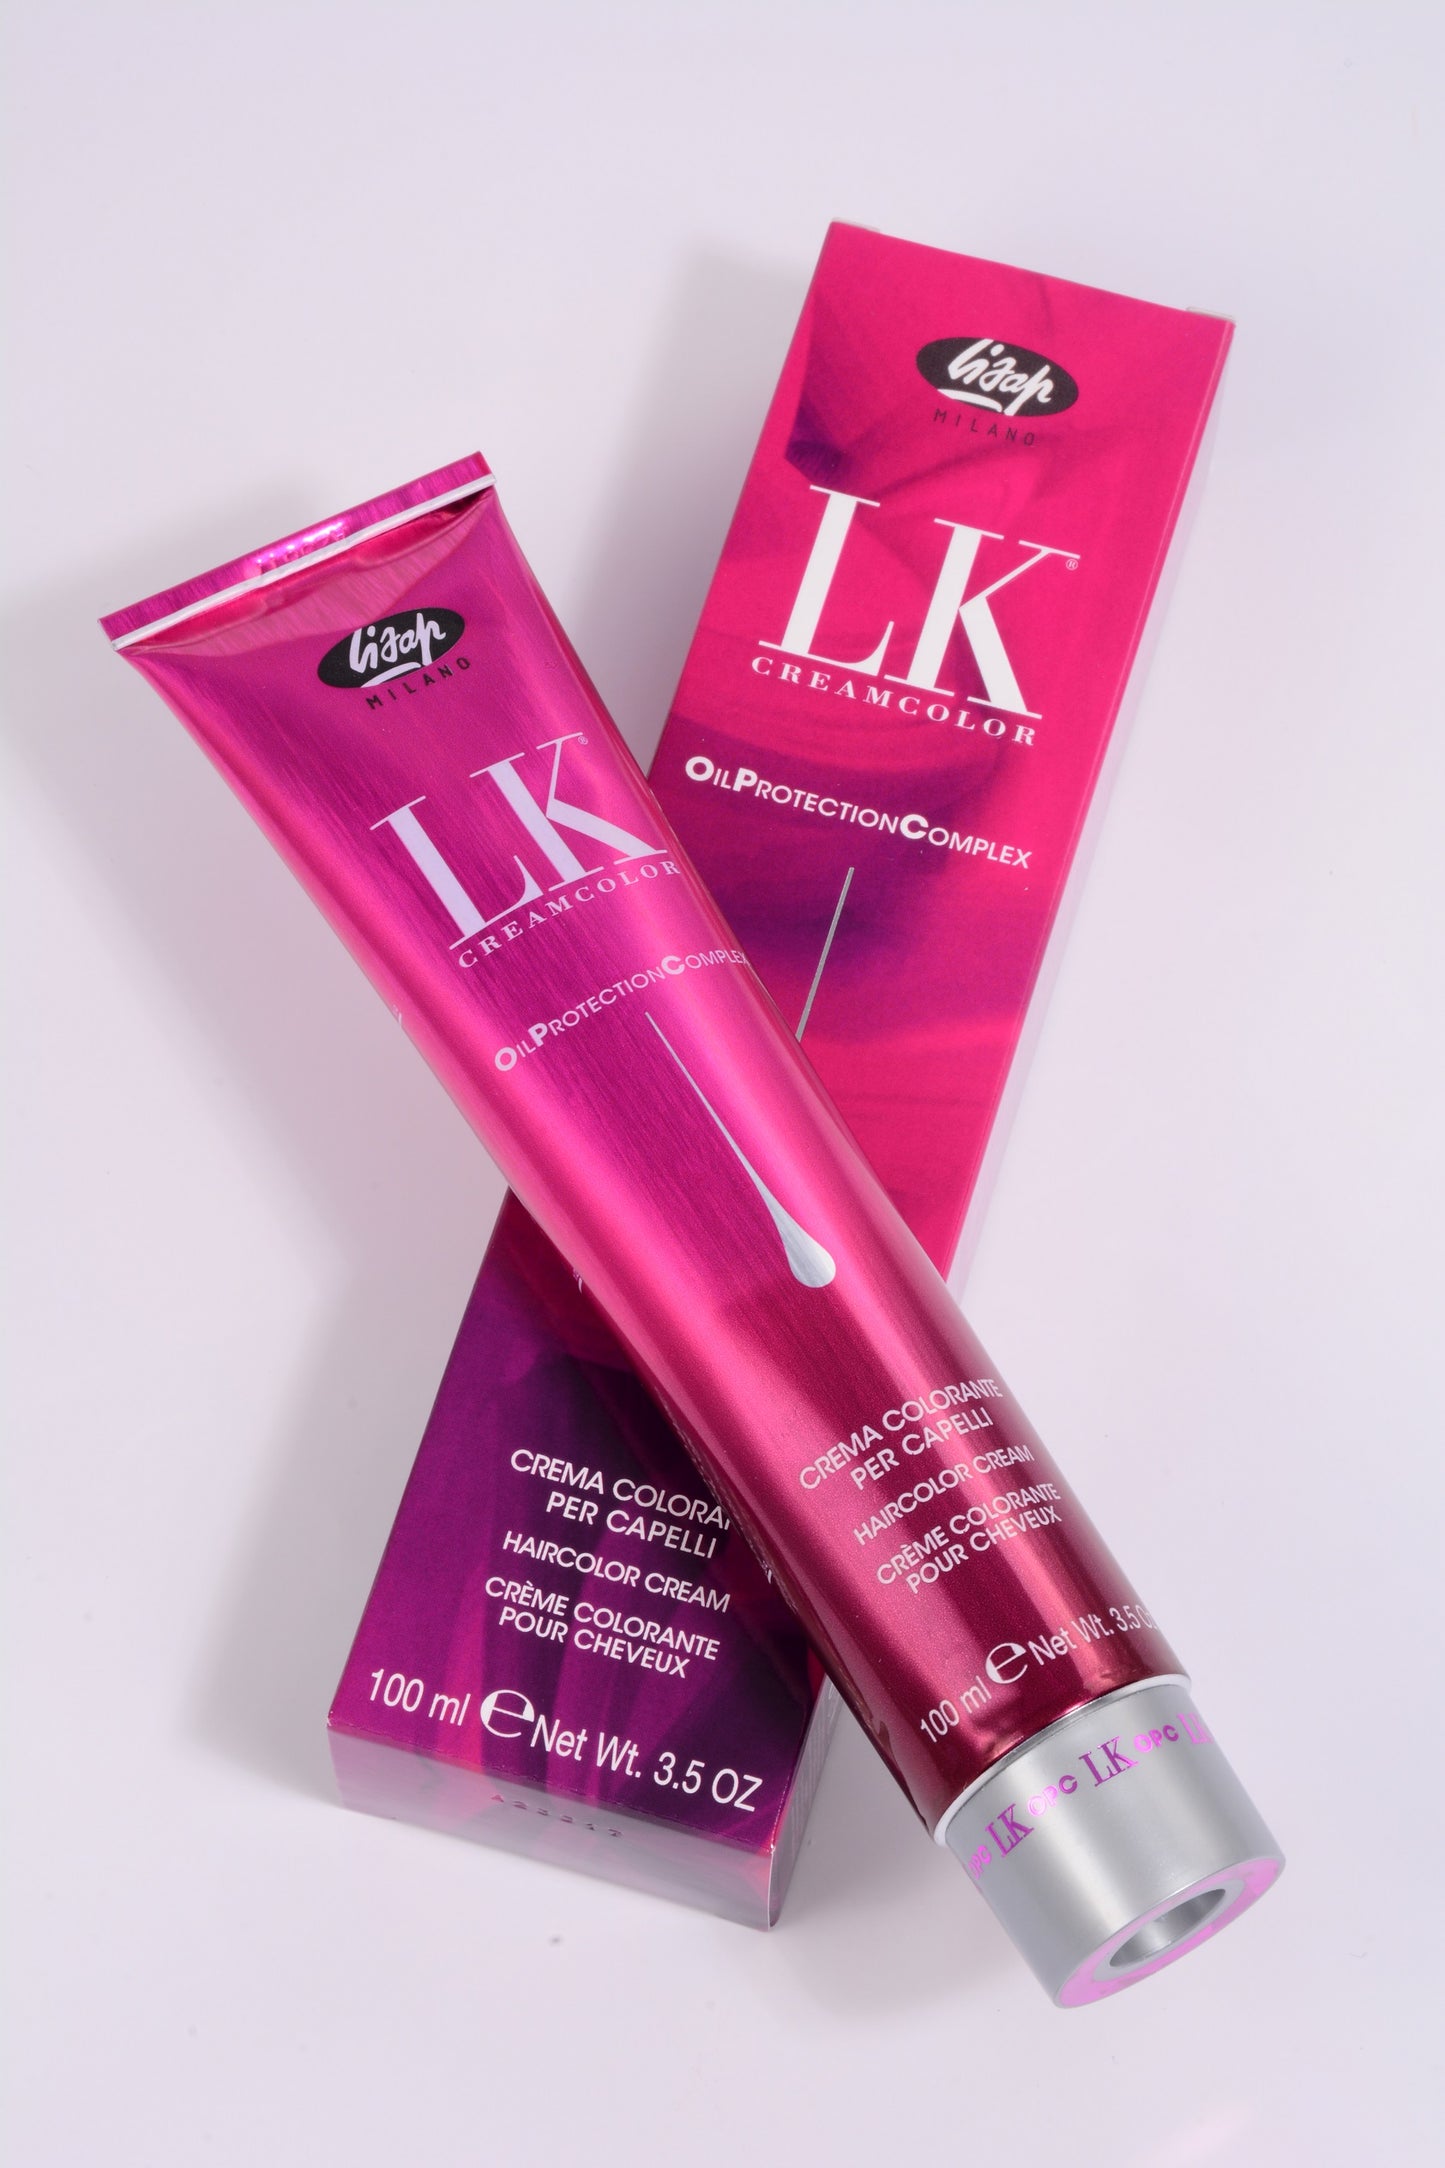 LK Creamcolor 00/2 Oil Protection Complex